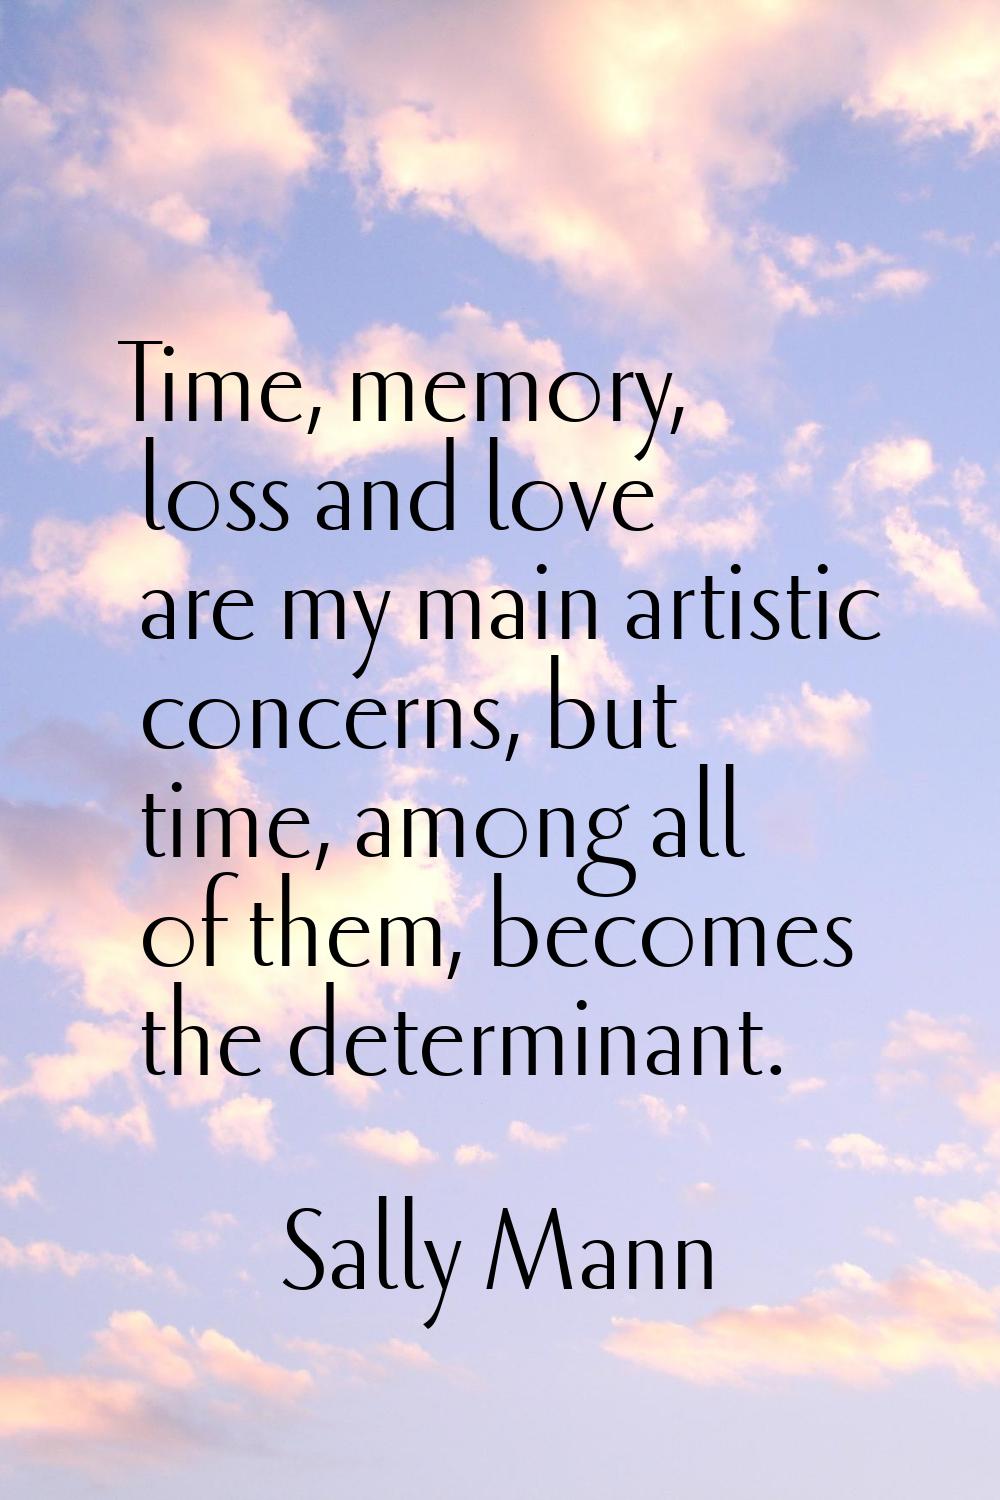 Time, memory, loss and love are my main artistic concerns, but time, among all of them, becomes the